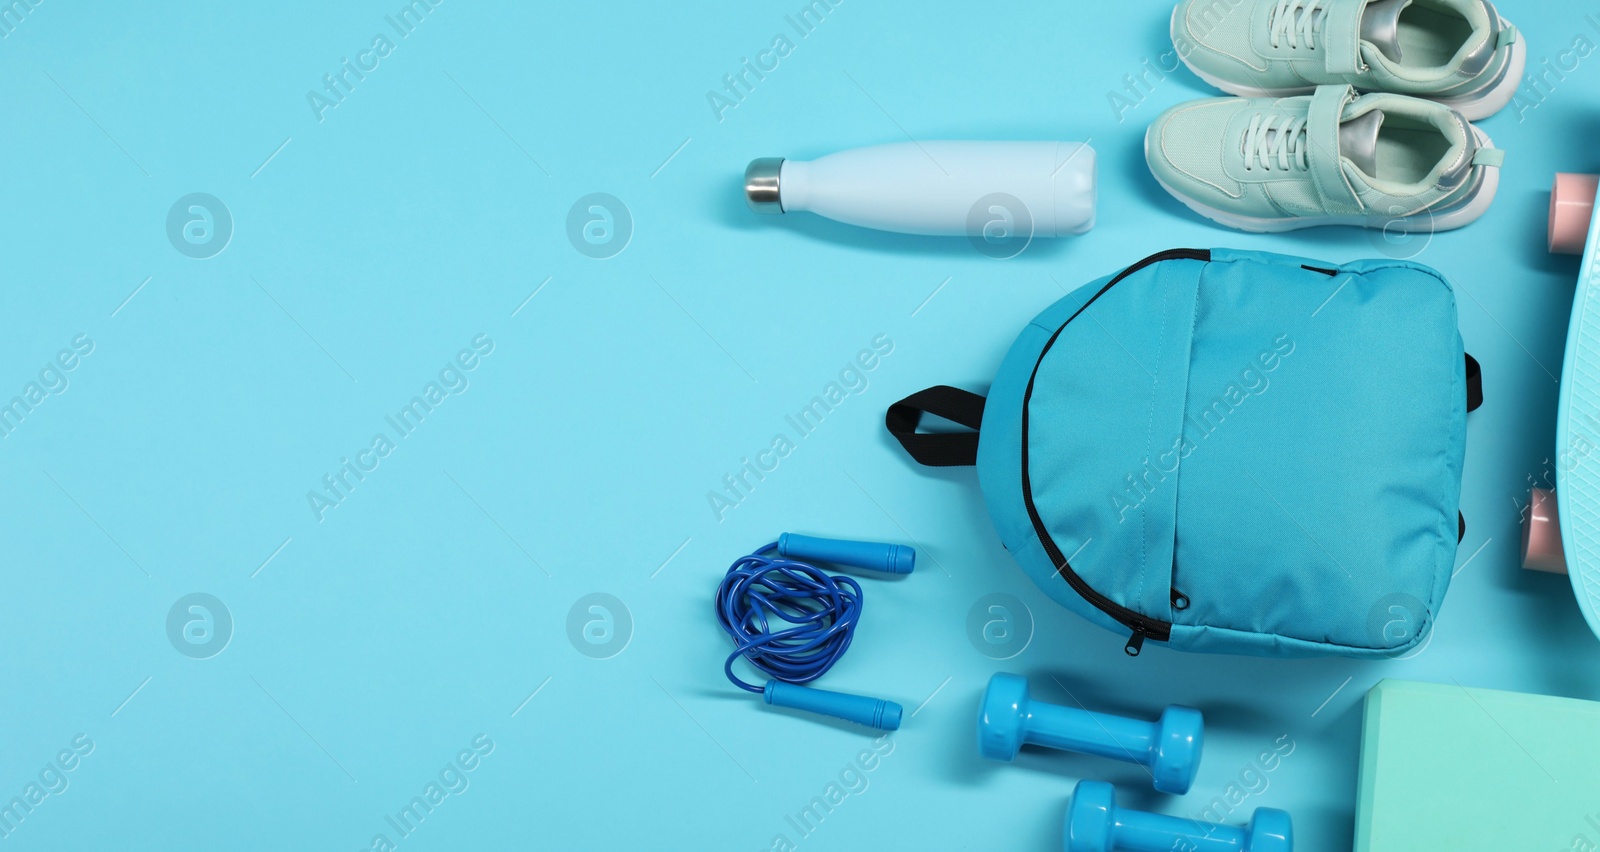 Photo of Different sports equipment on light blue background, flat lay. Space for text